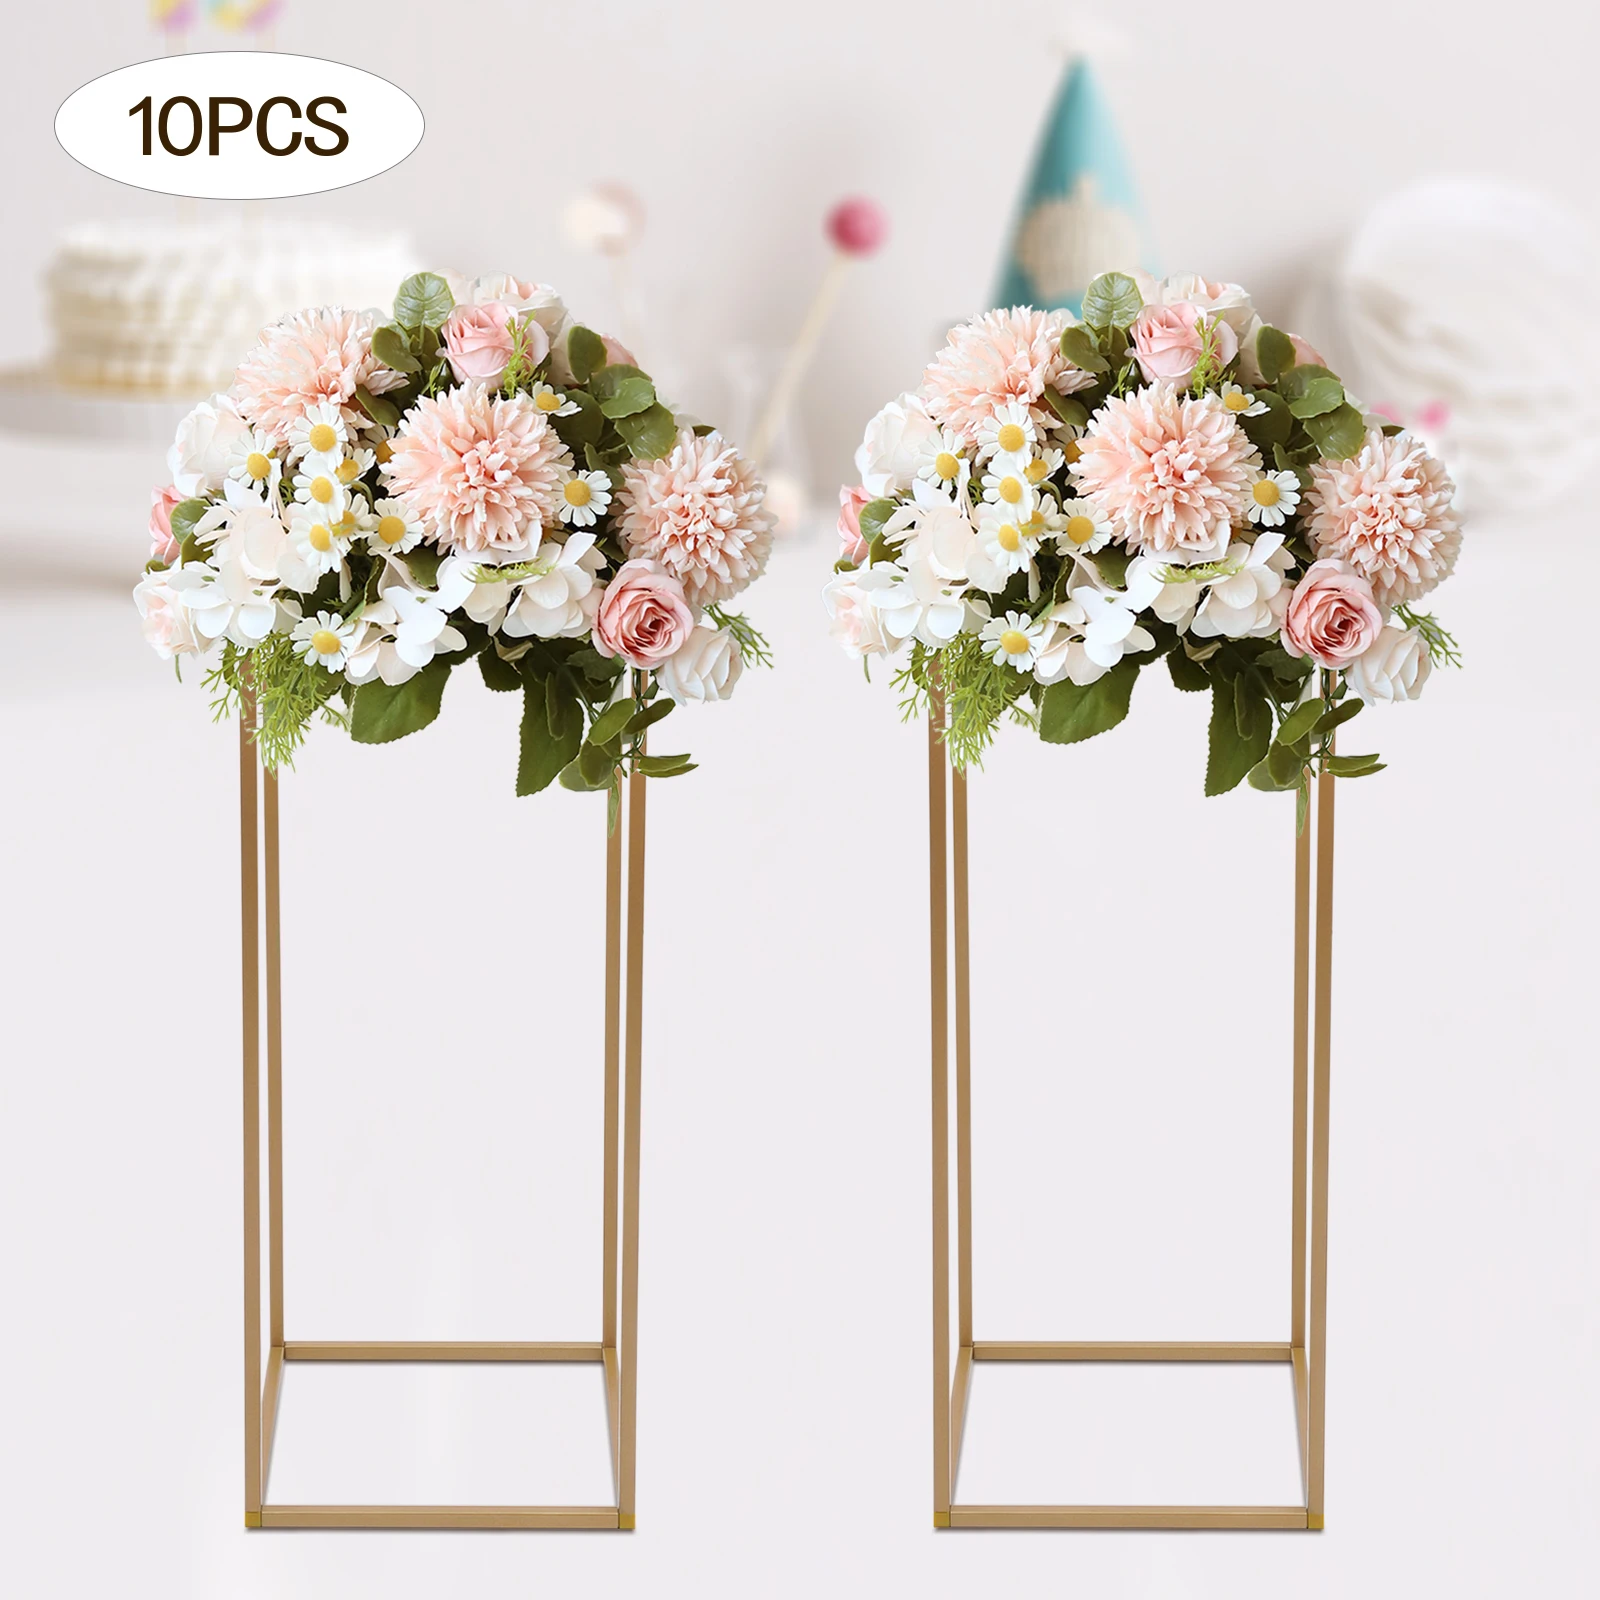 

10PCS 23.6Inch Tall Gold/White Metal Flower Stand for Wedding Table Centerpieces Decor Set of 10 Metal Flower Stand Wedding